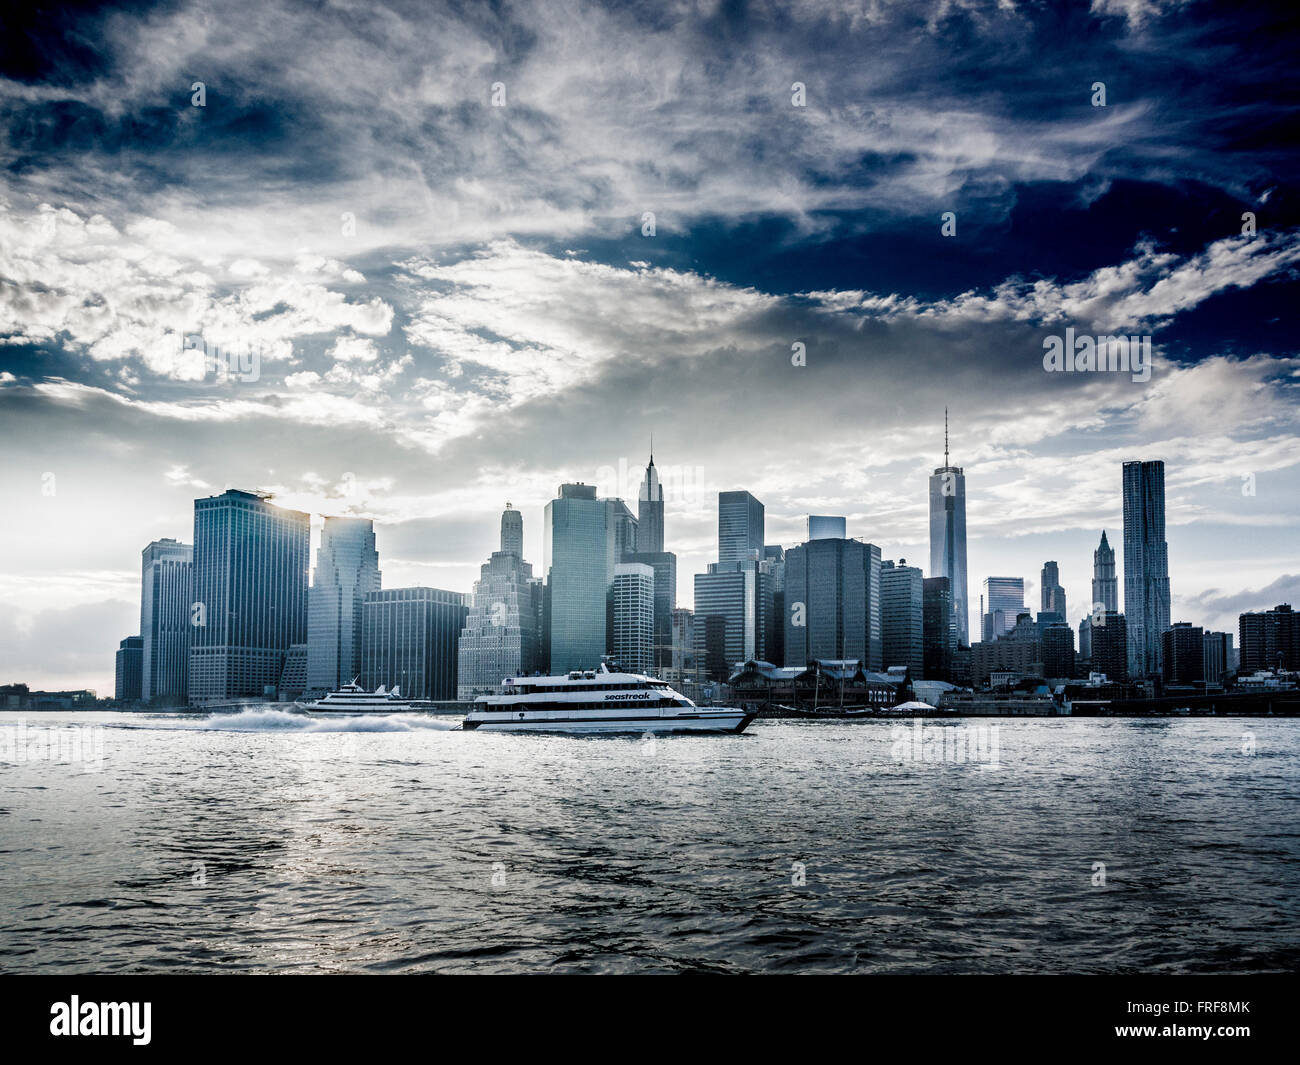 Boat on East River with Lower Manhattan skyline in background, New York City, USA. Stock Photo